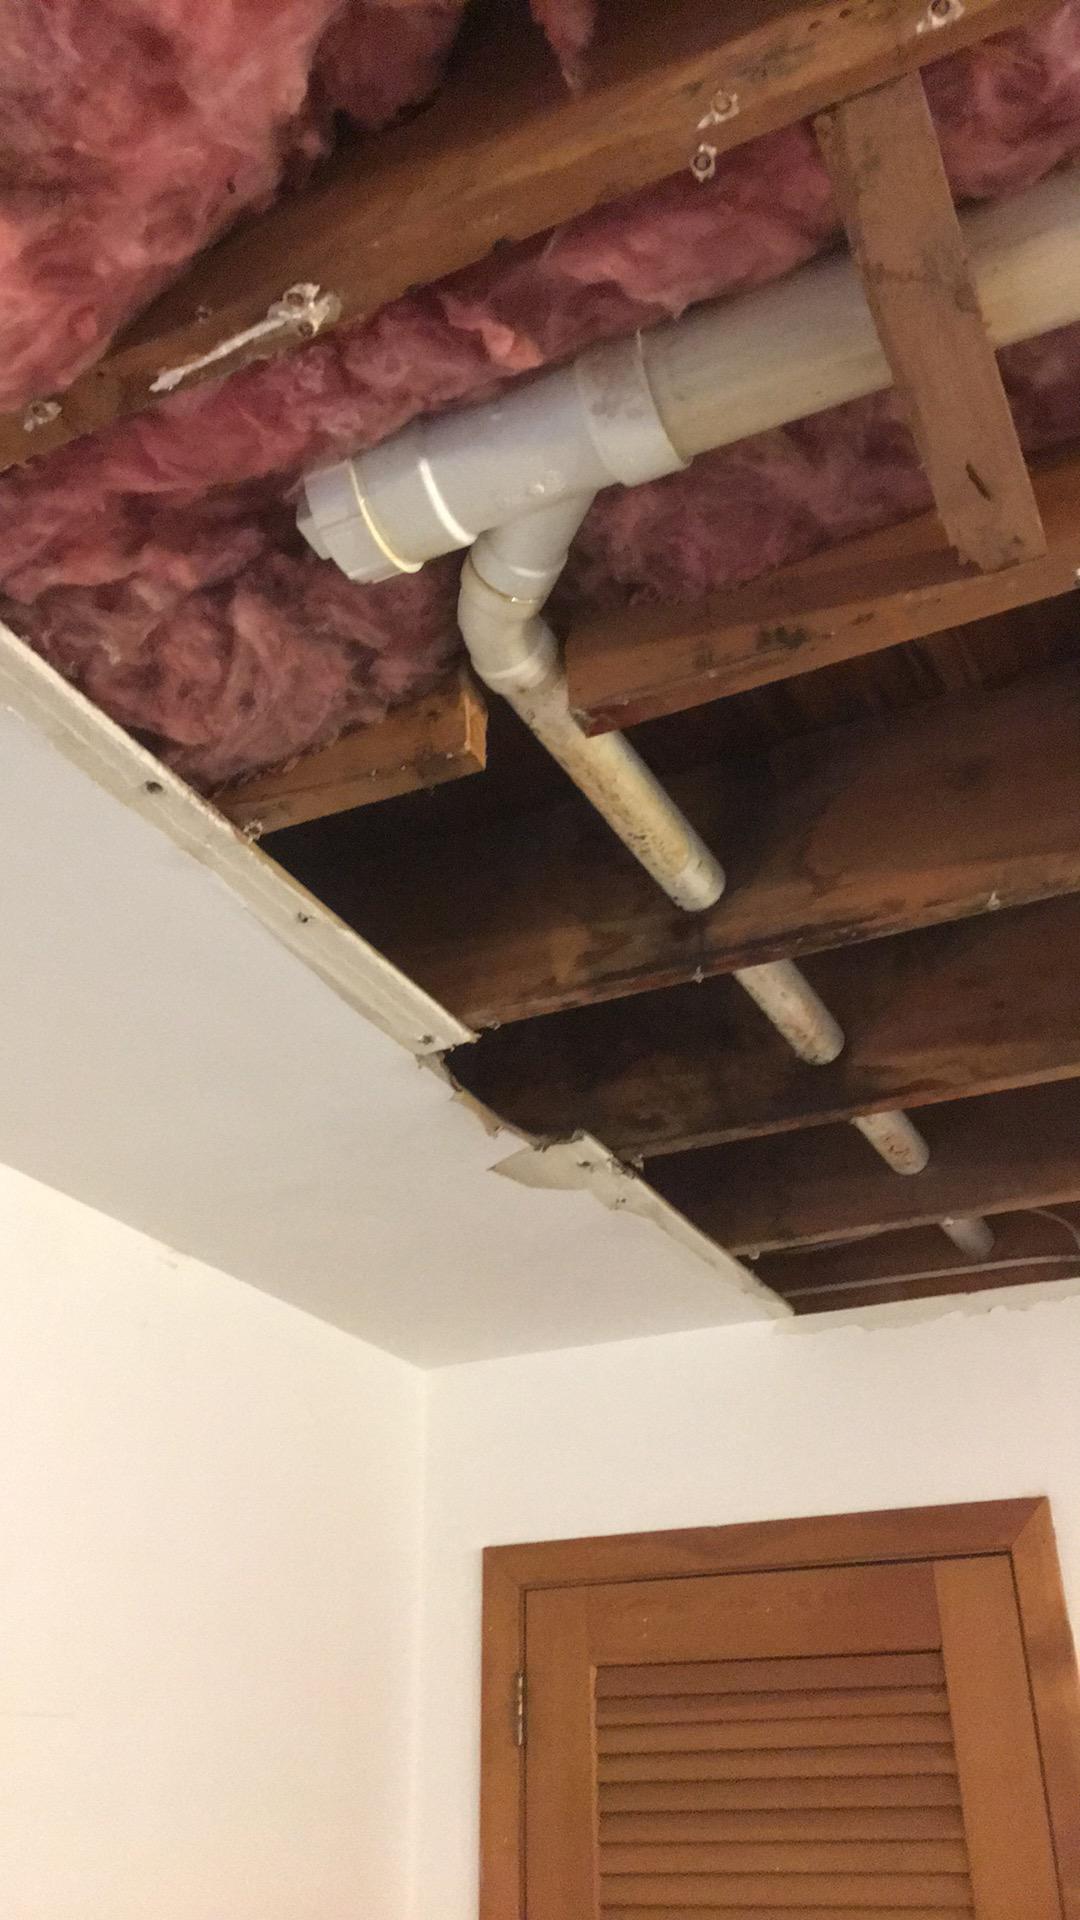 Affected material removed from basement ceiling